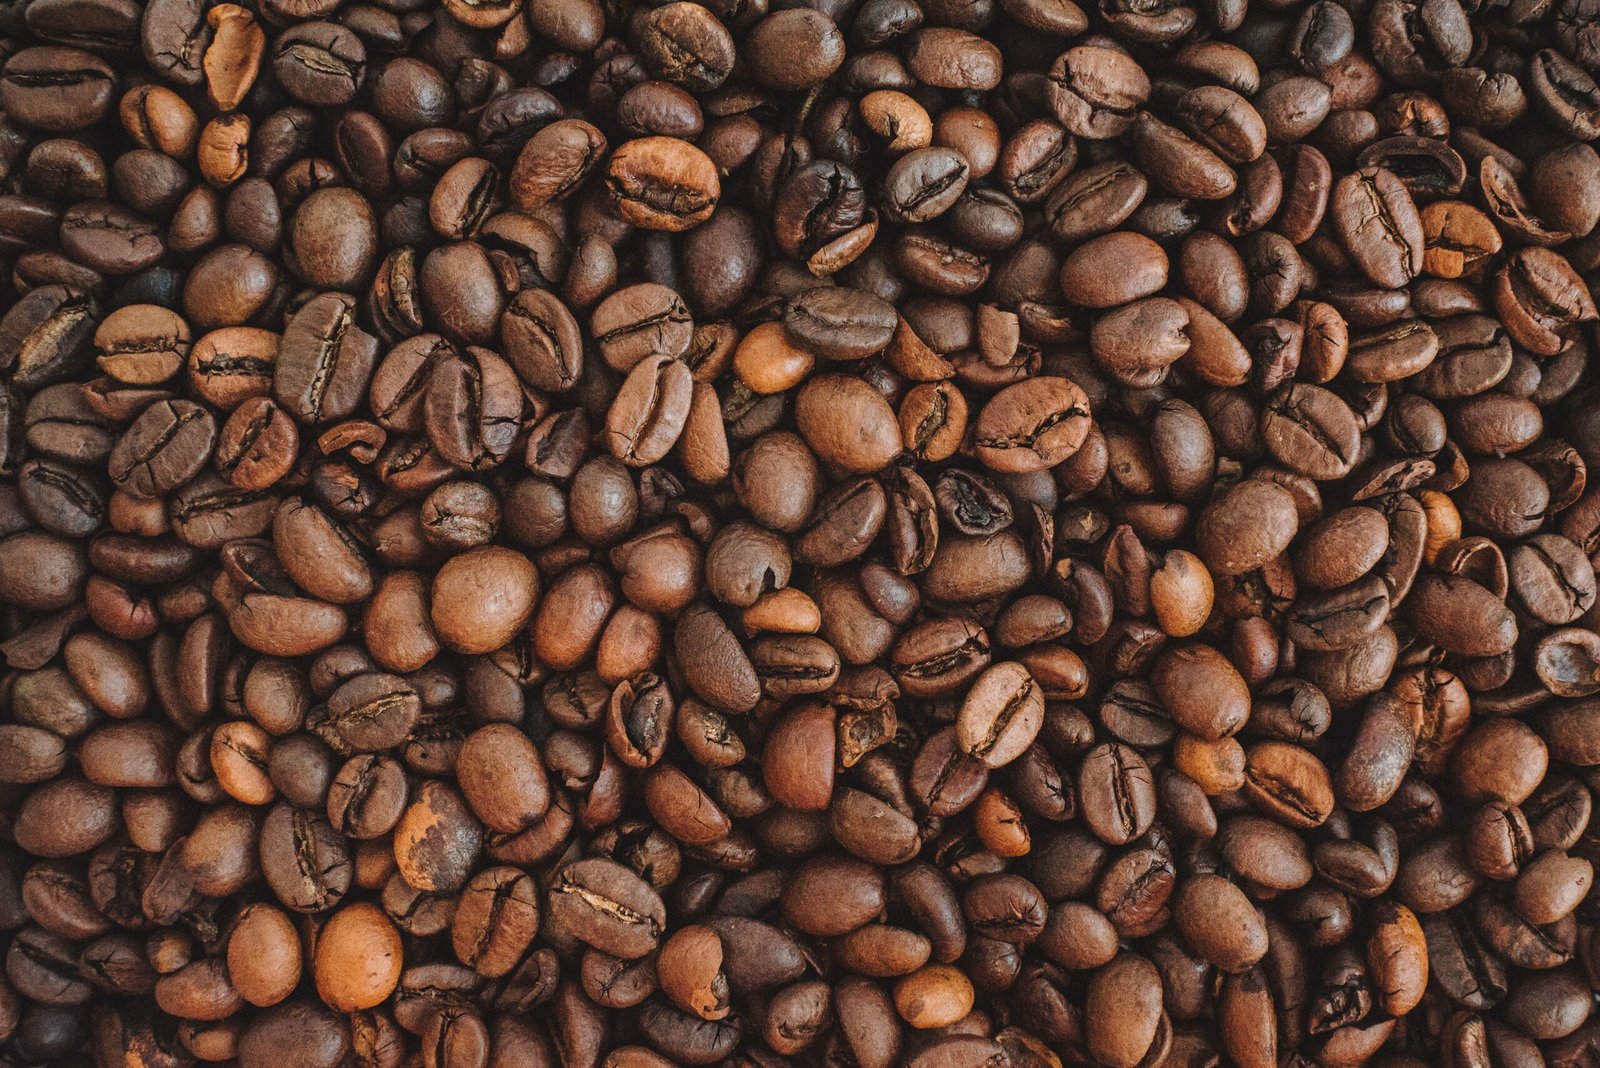 Building a Community of Coffee Lovers through Direct Trade